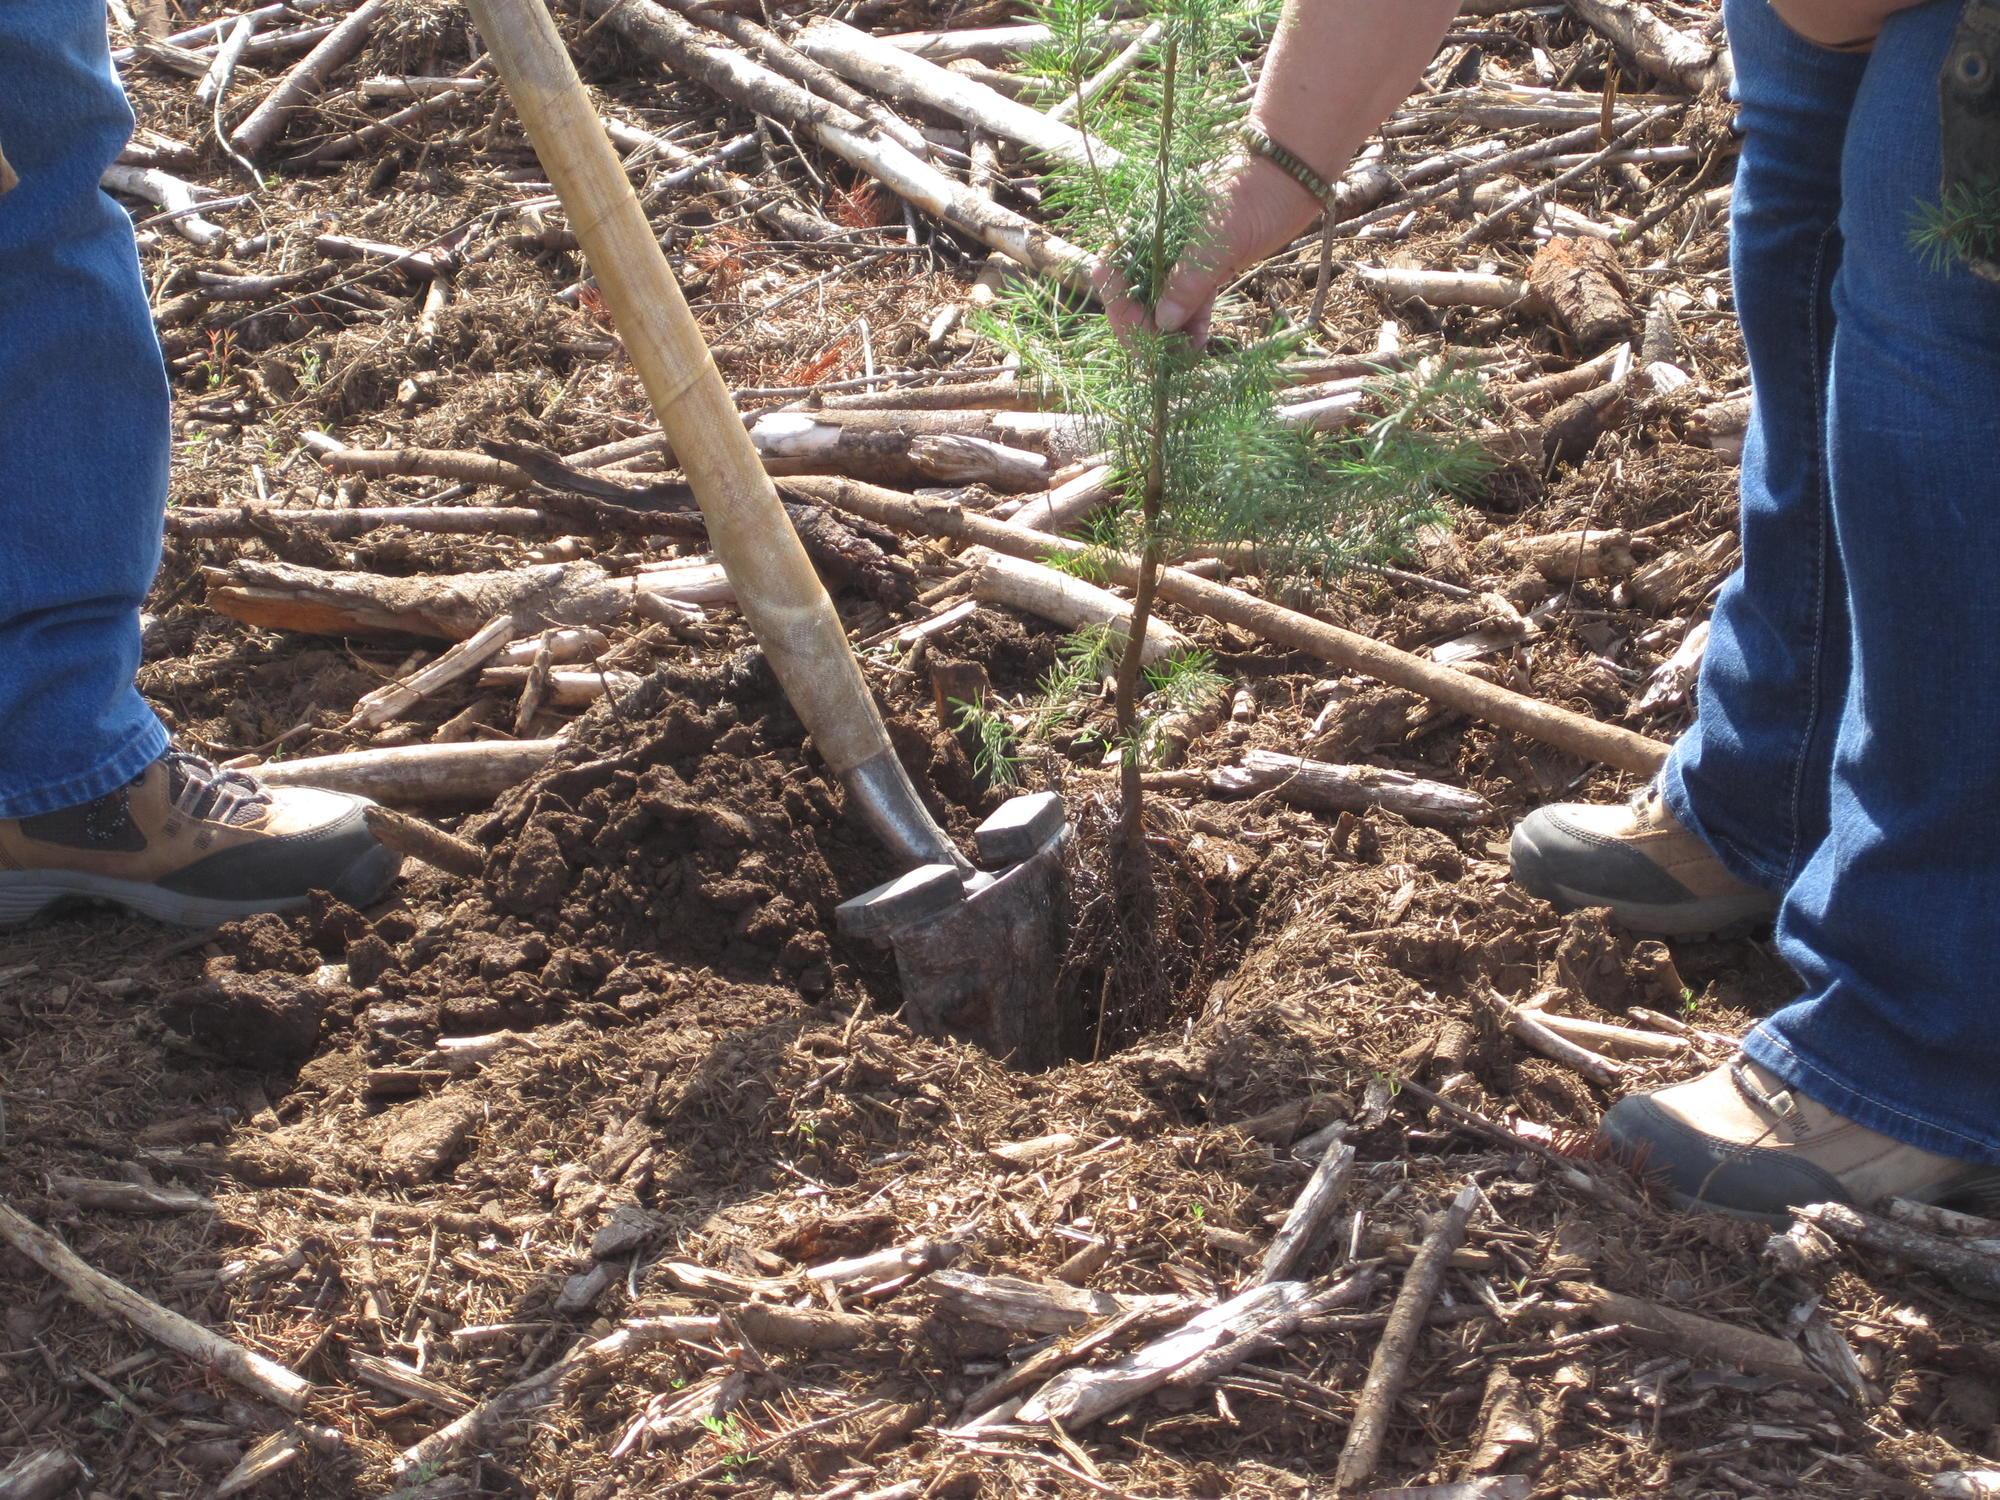 A tree seedling is planted by one person as another holds a shovel in the ground.